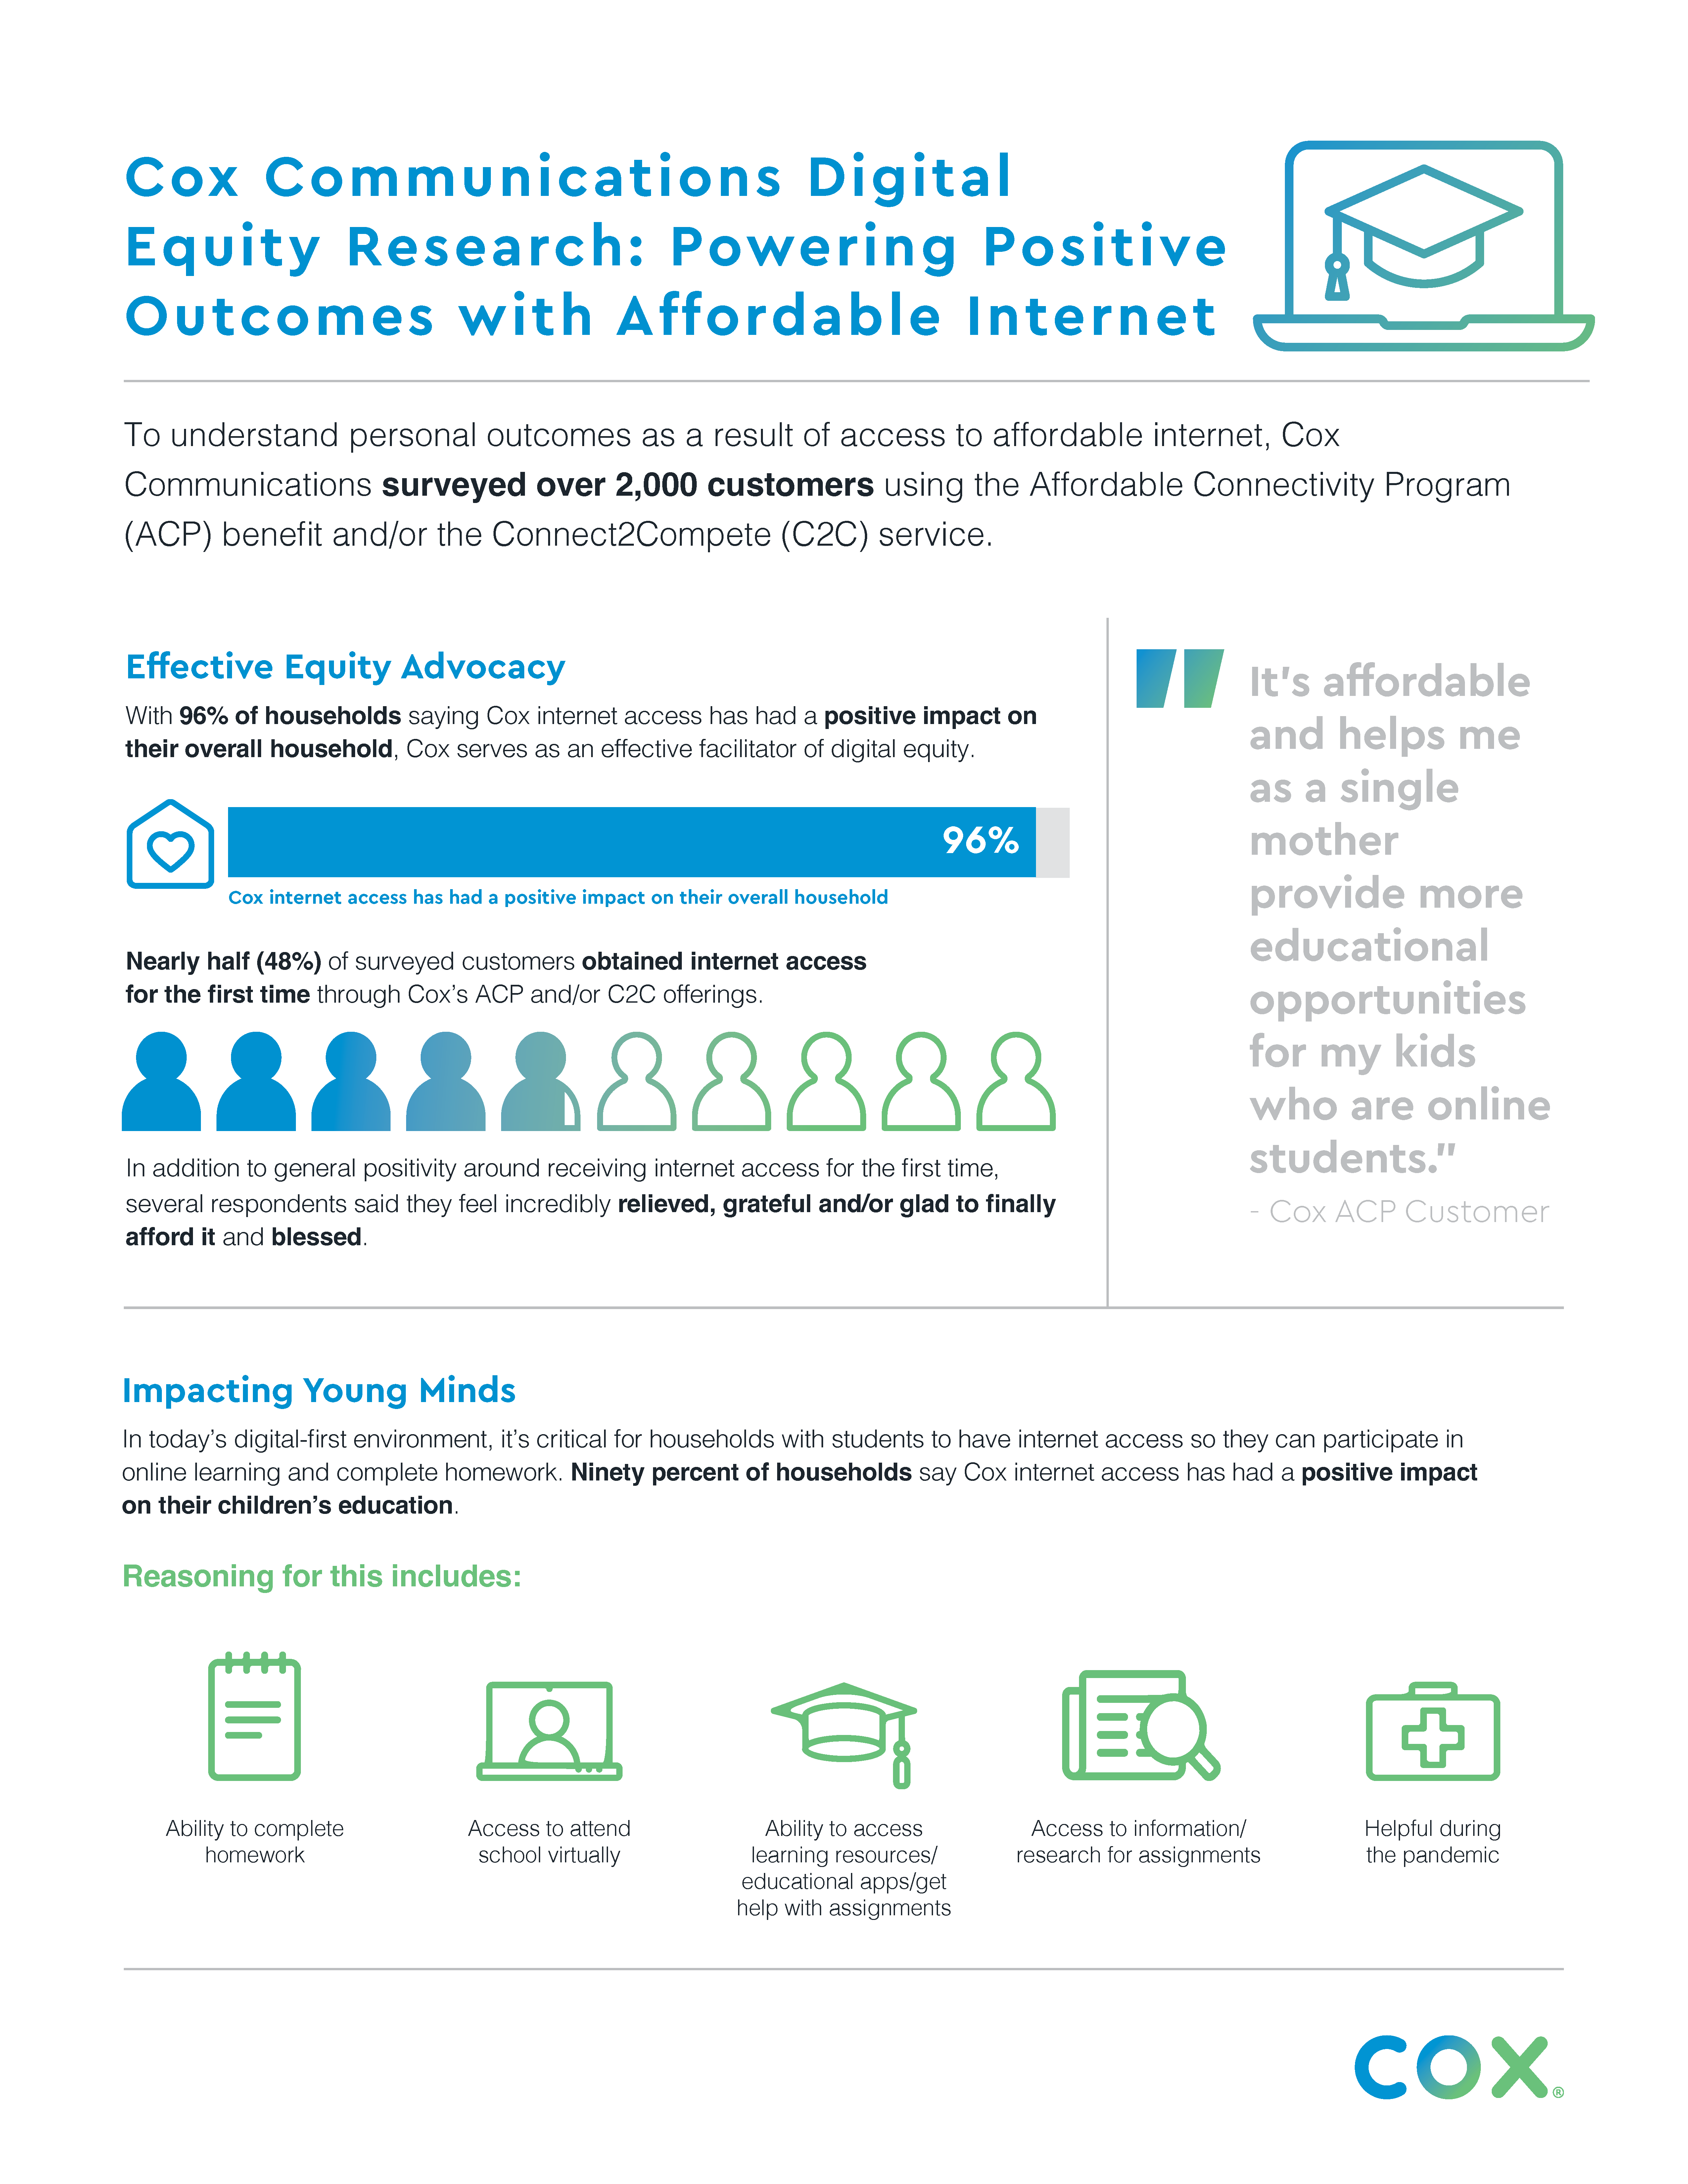 Affordability Research Survey Infographic